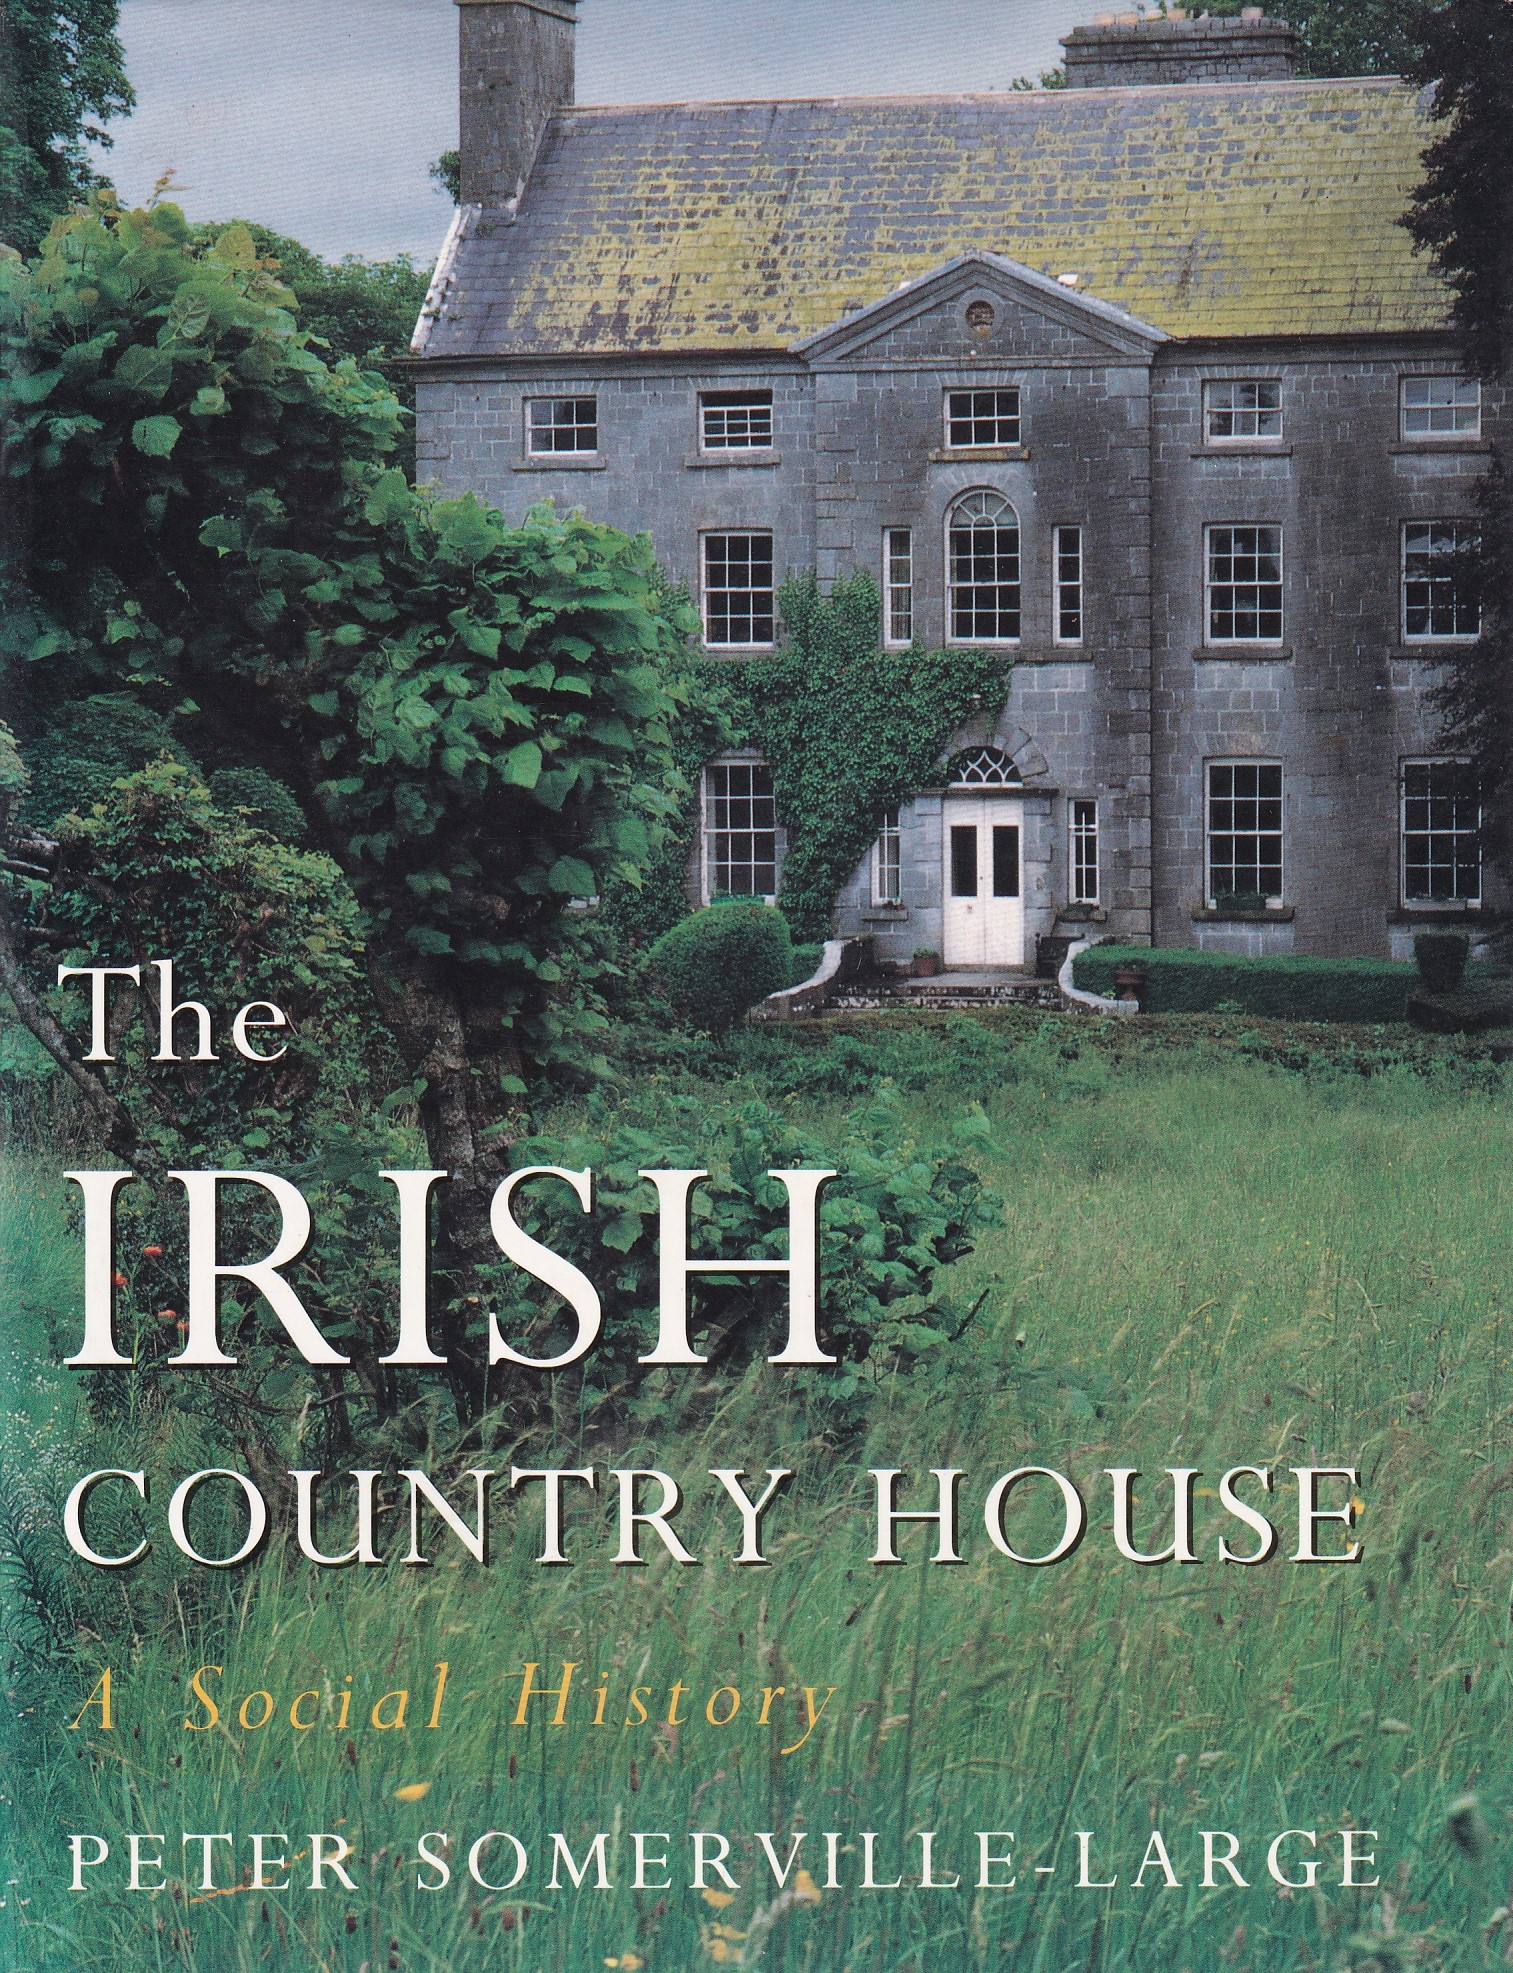 The Irish Country House: A Social History | Peter Somerville-Large | Charlie Byrne's